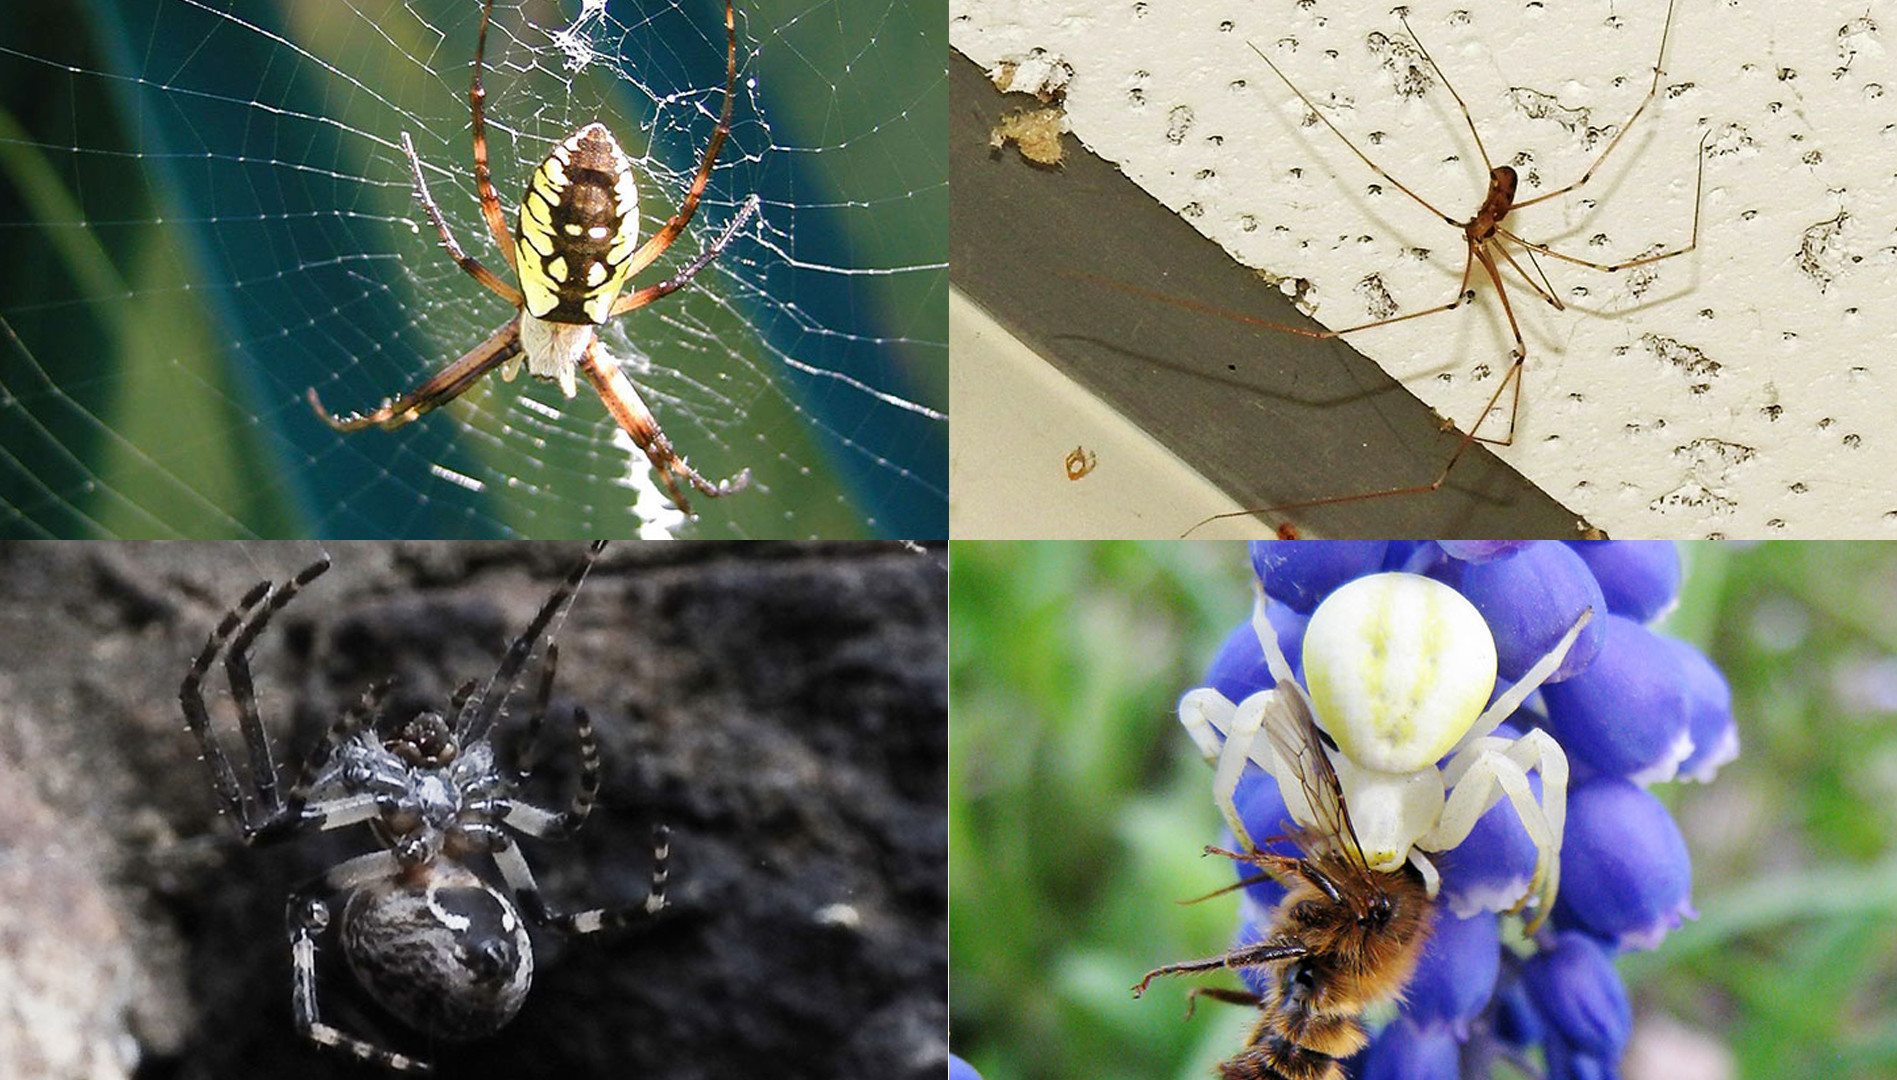 What's up with all the spiders? Plus common types you'll see around ...